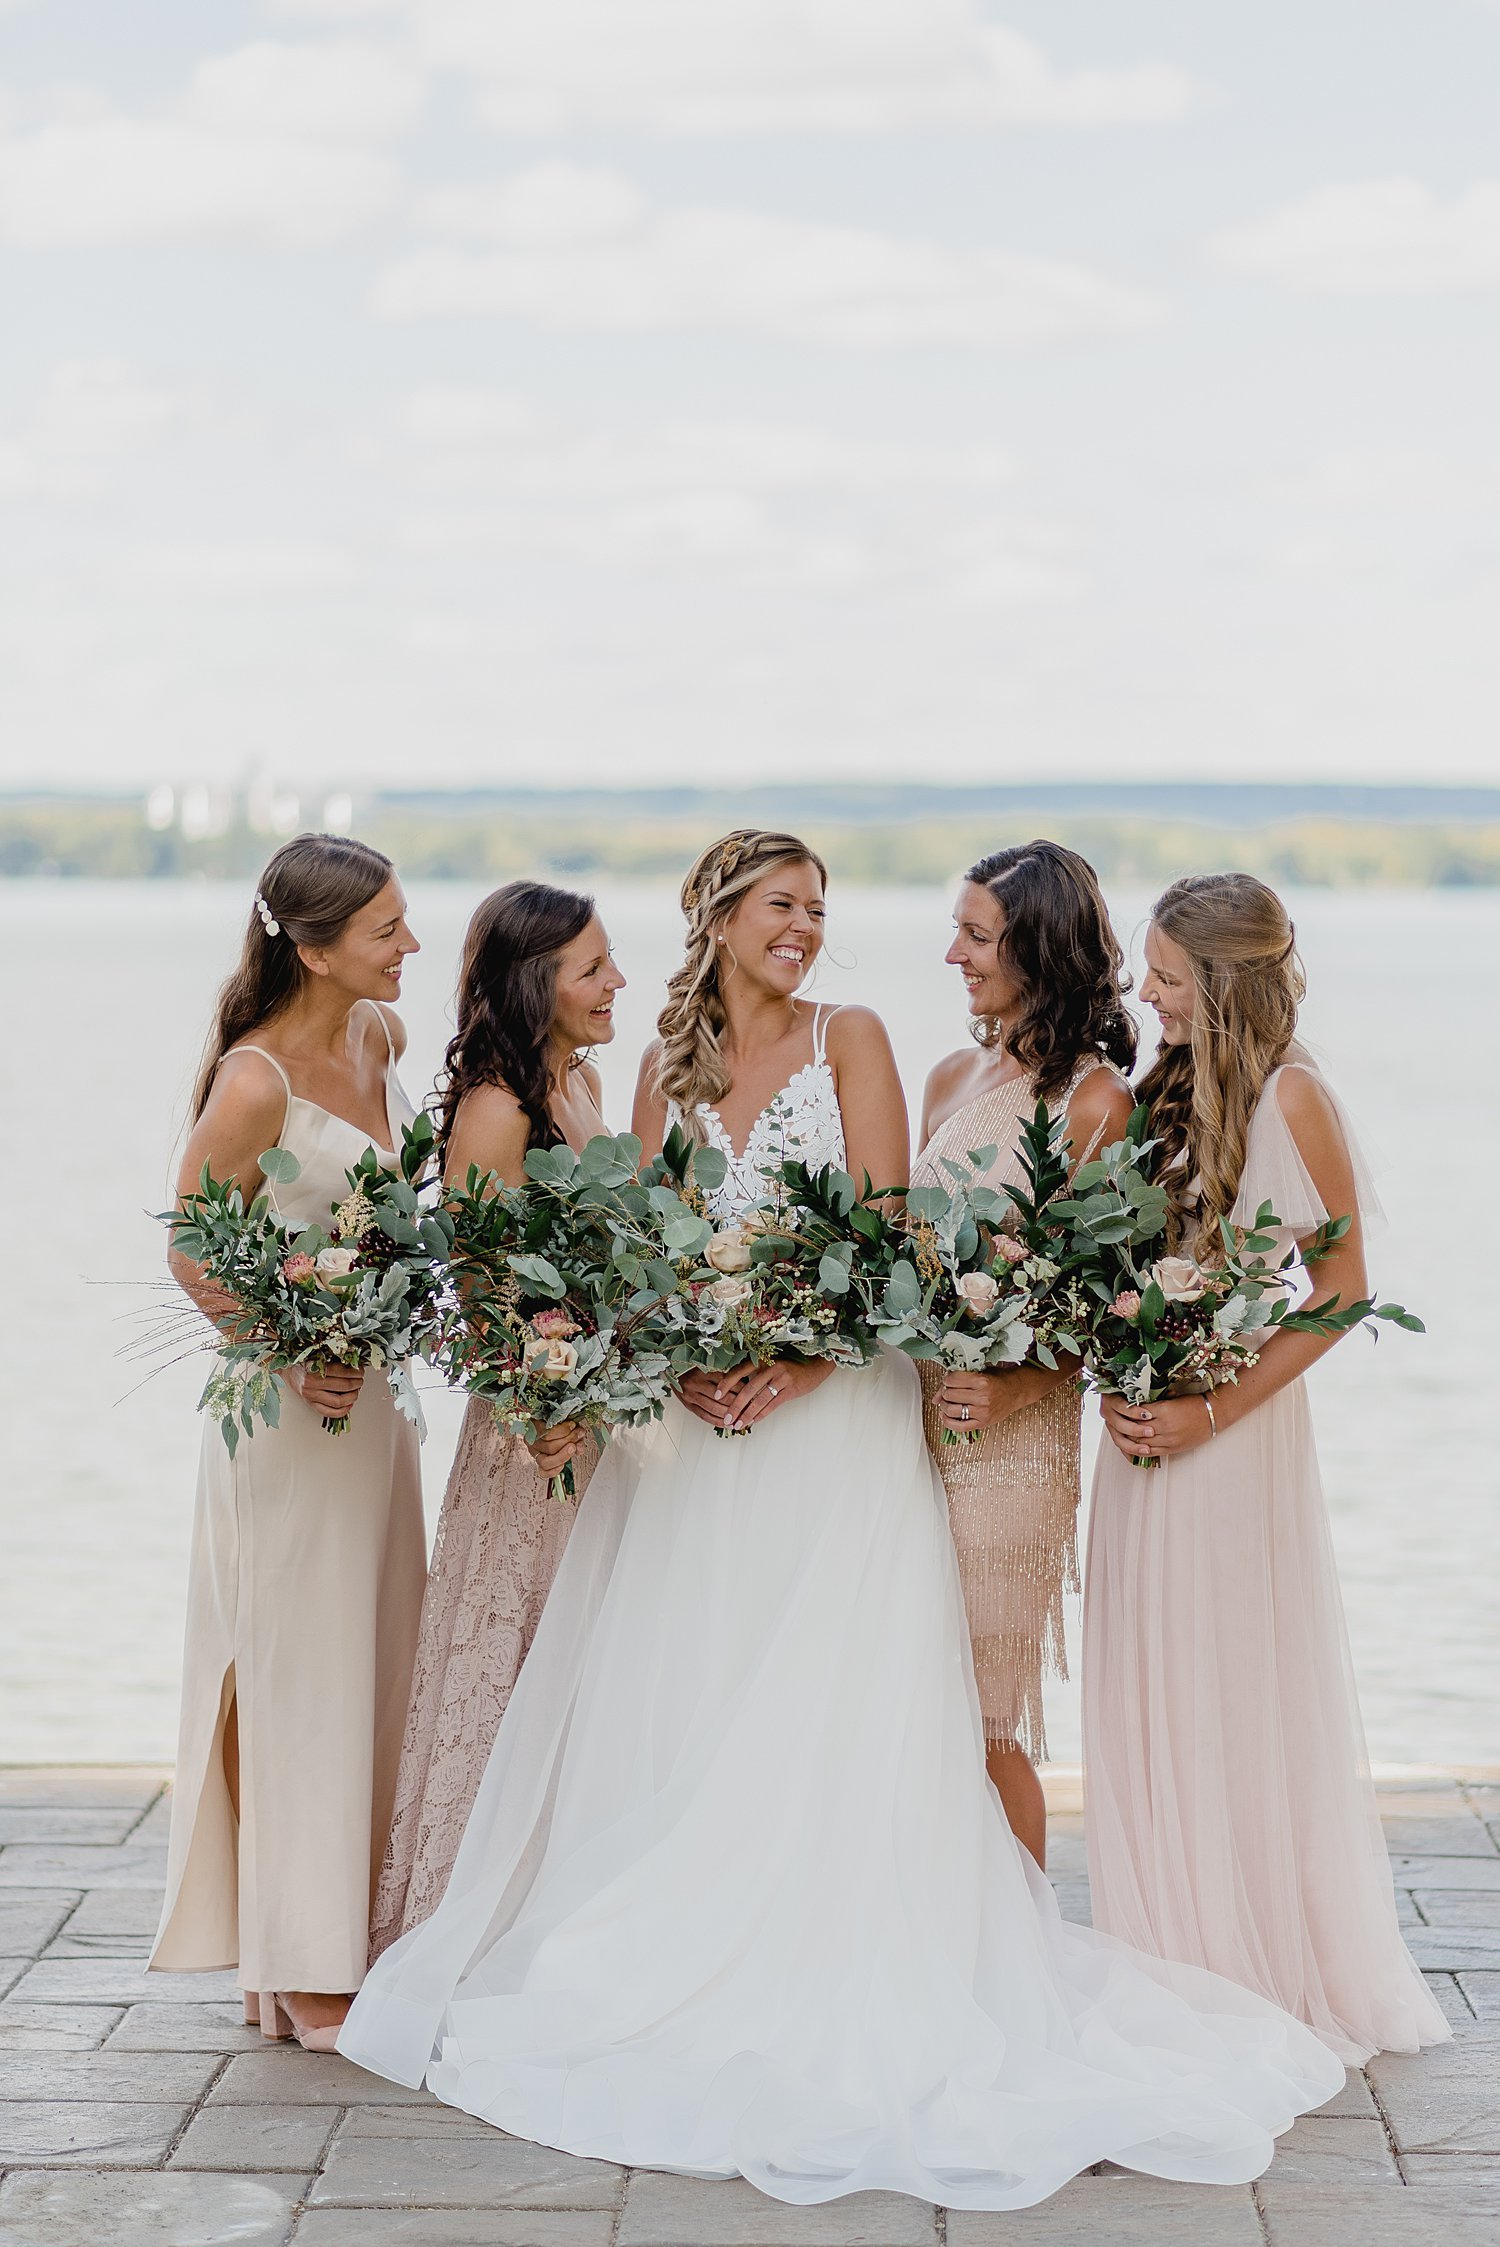 A Royal Canadian Mountie's Intimate Summer Wedding in Prince Edward County | Prince Edward County Wedding Photographer | Holly McMurter Photographs_0014.jpg